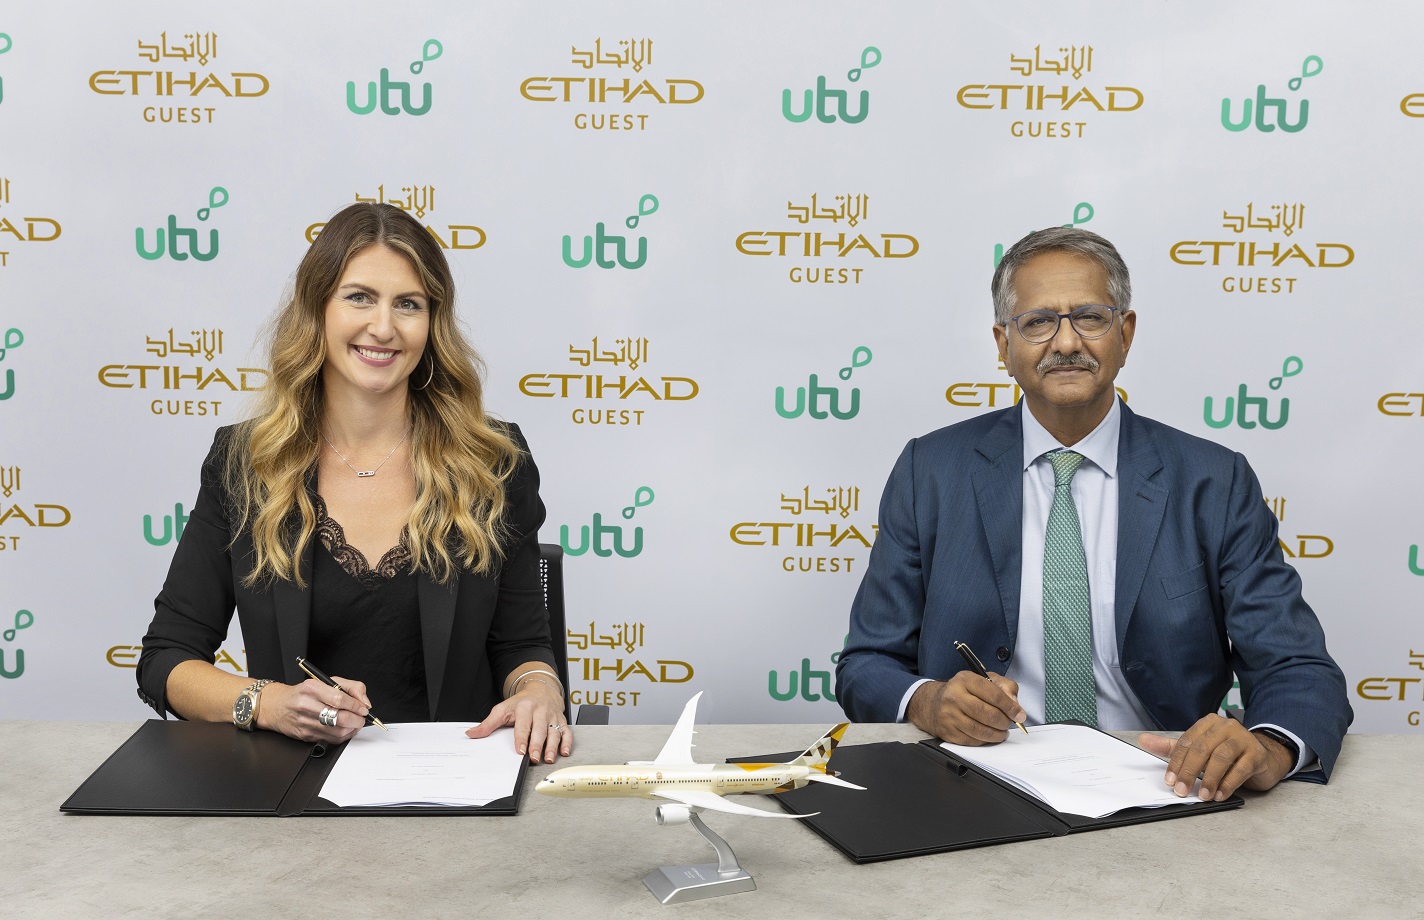 Etihad Guest And UTU Partner To Bring Extra Rewards To Etihad Guest Members